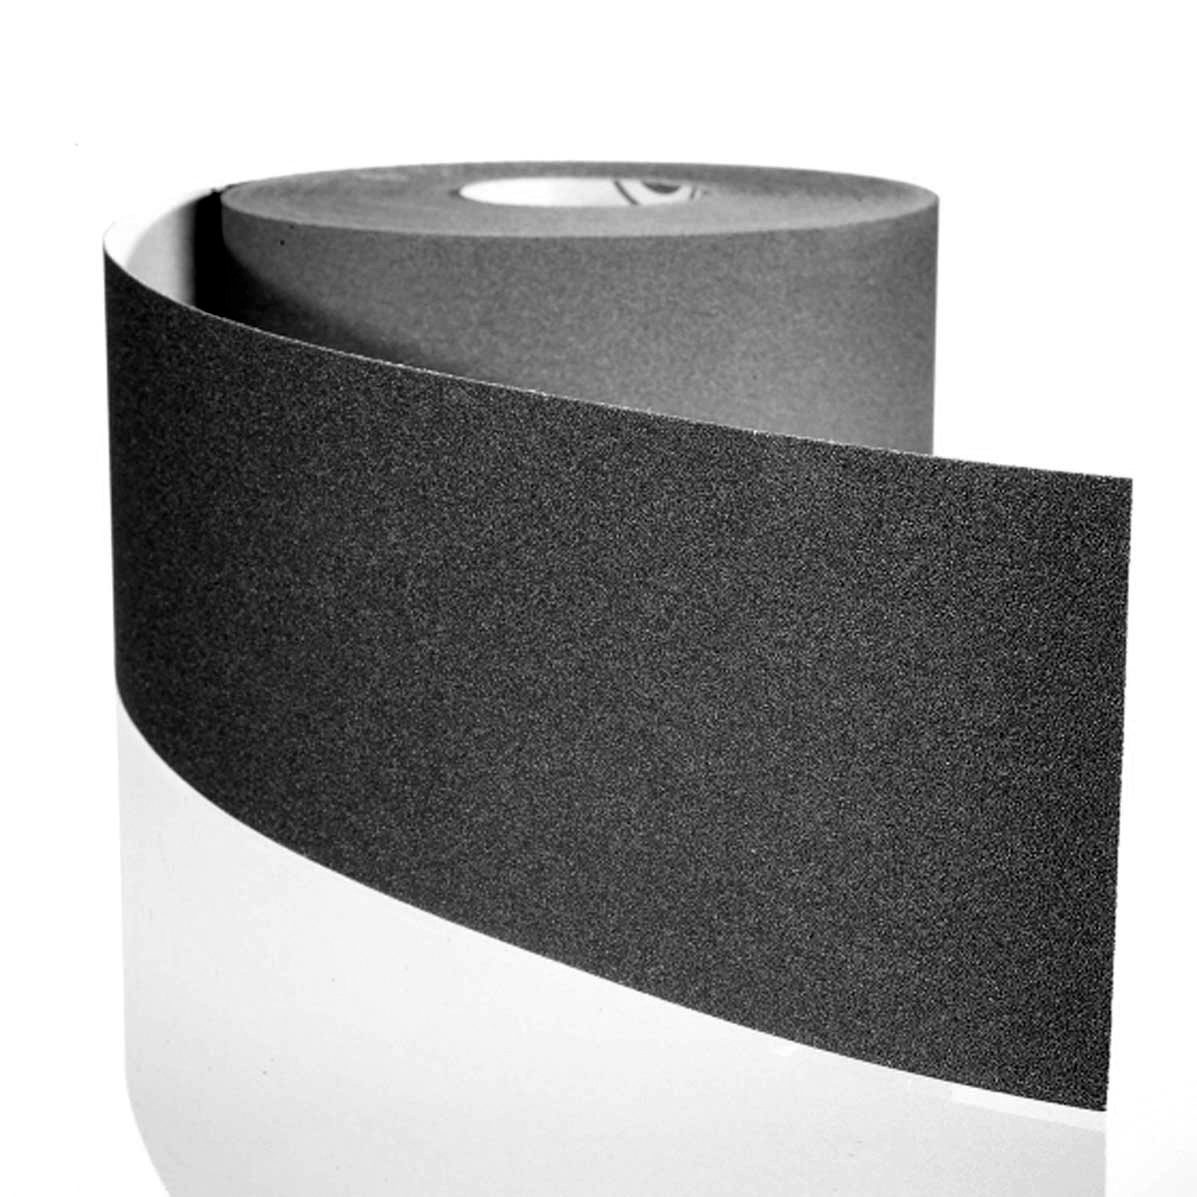 Hermes Silicon-Carbide Paper Rolls